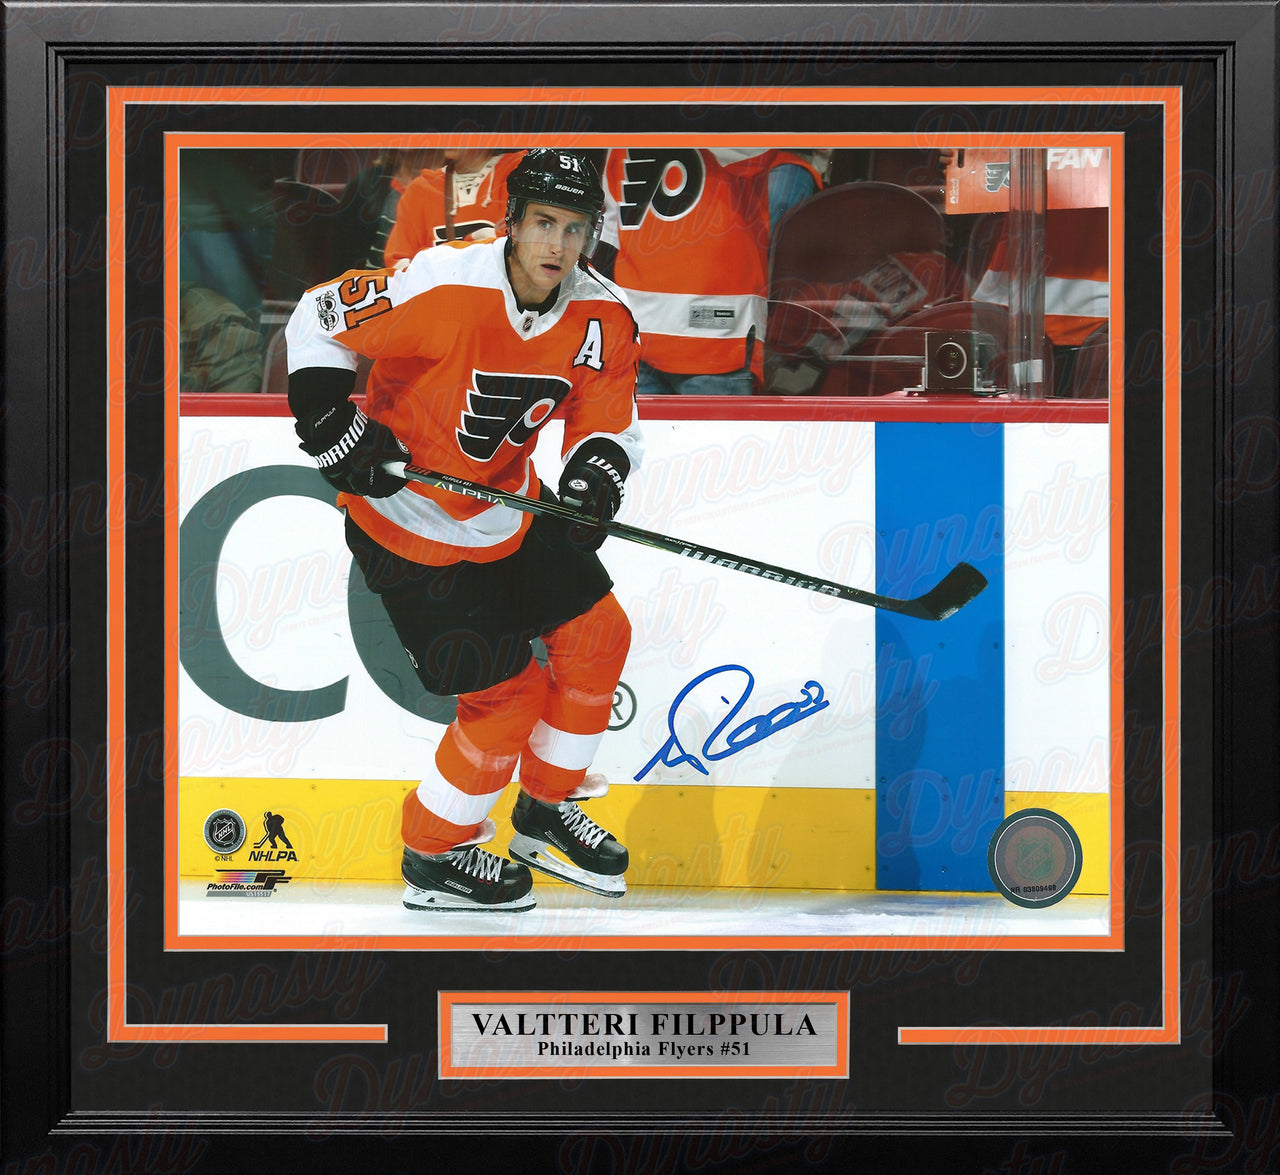 Valtteri Filppula in Action Philadelphia Flyers NHL Hockey Autographed Framed and Matted Photo - Dynasty Sports & Framing 